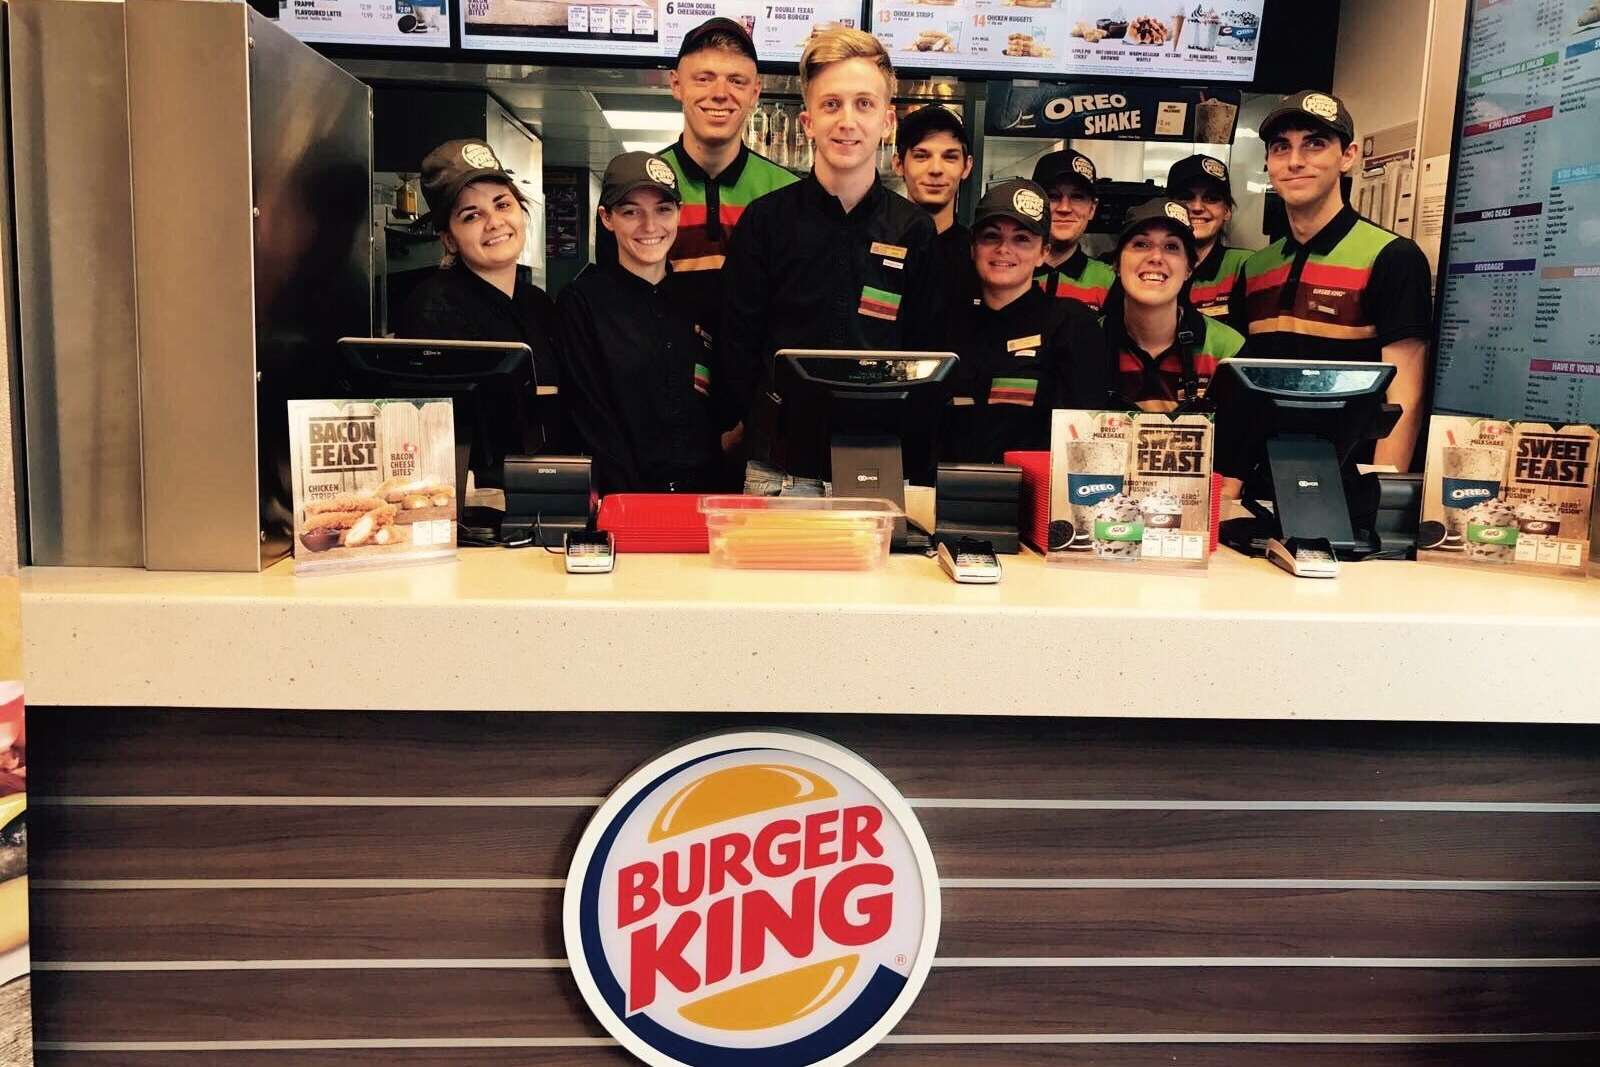 The team at Burger King will be happy to take your delivery order.